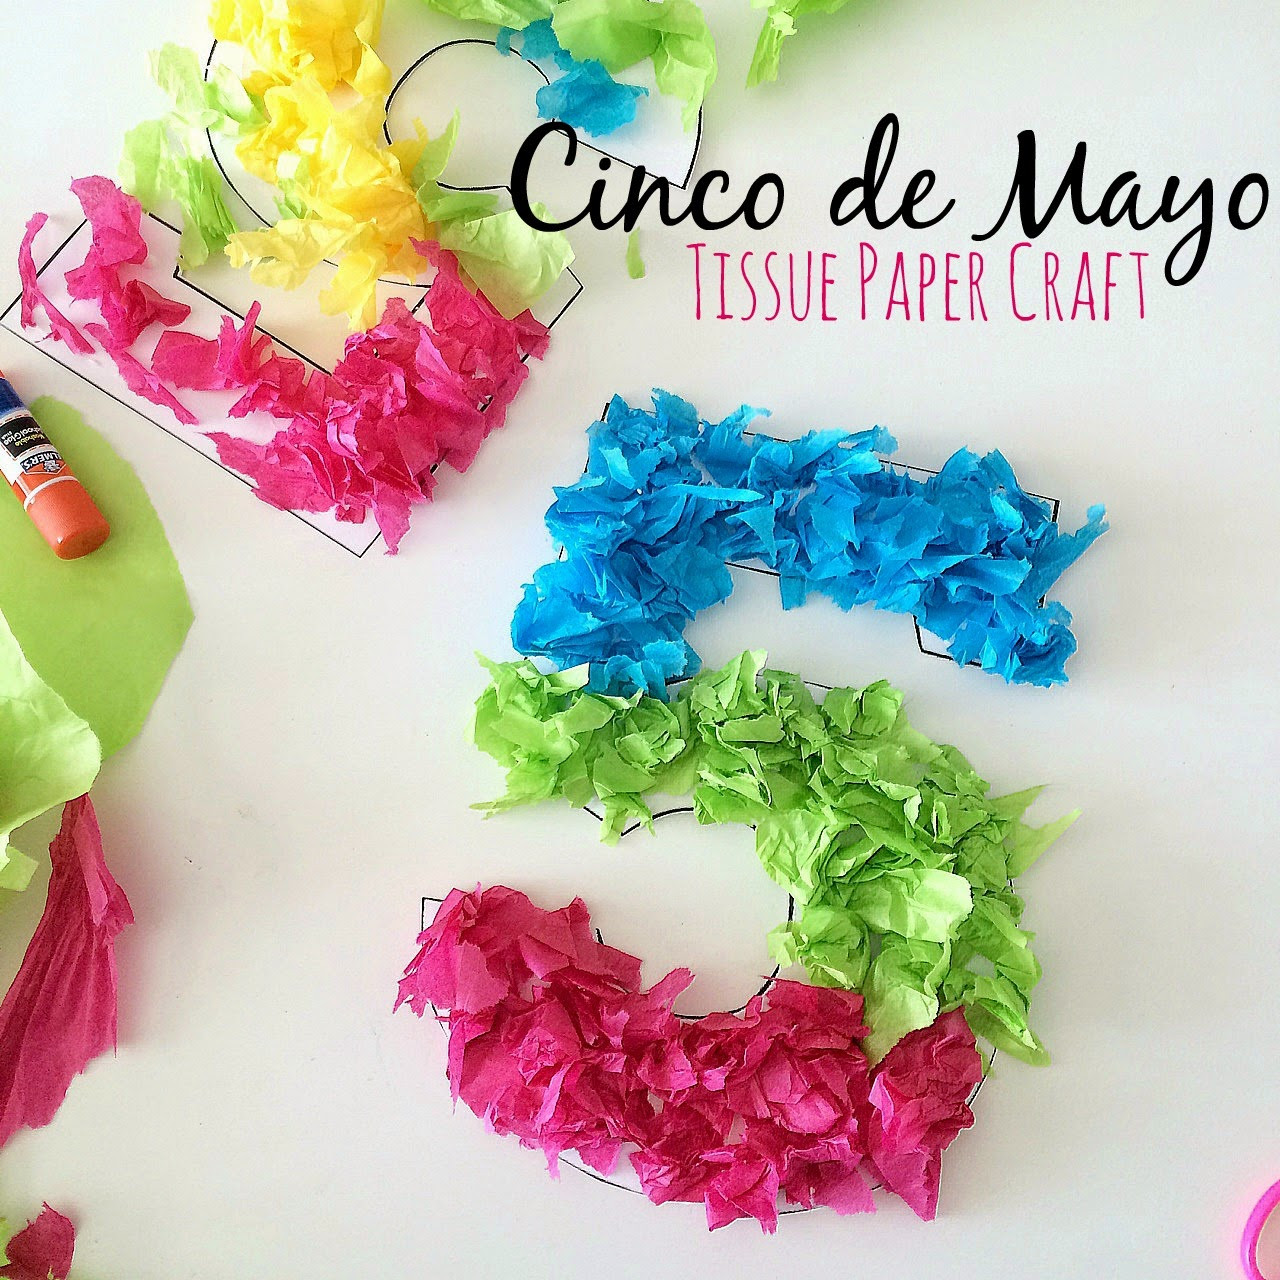 Cinco De Mayo Crafts For Toddlers
 Blue Skies Ahead Cinco de Mayo Tissue Paper Craft